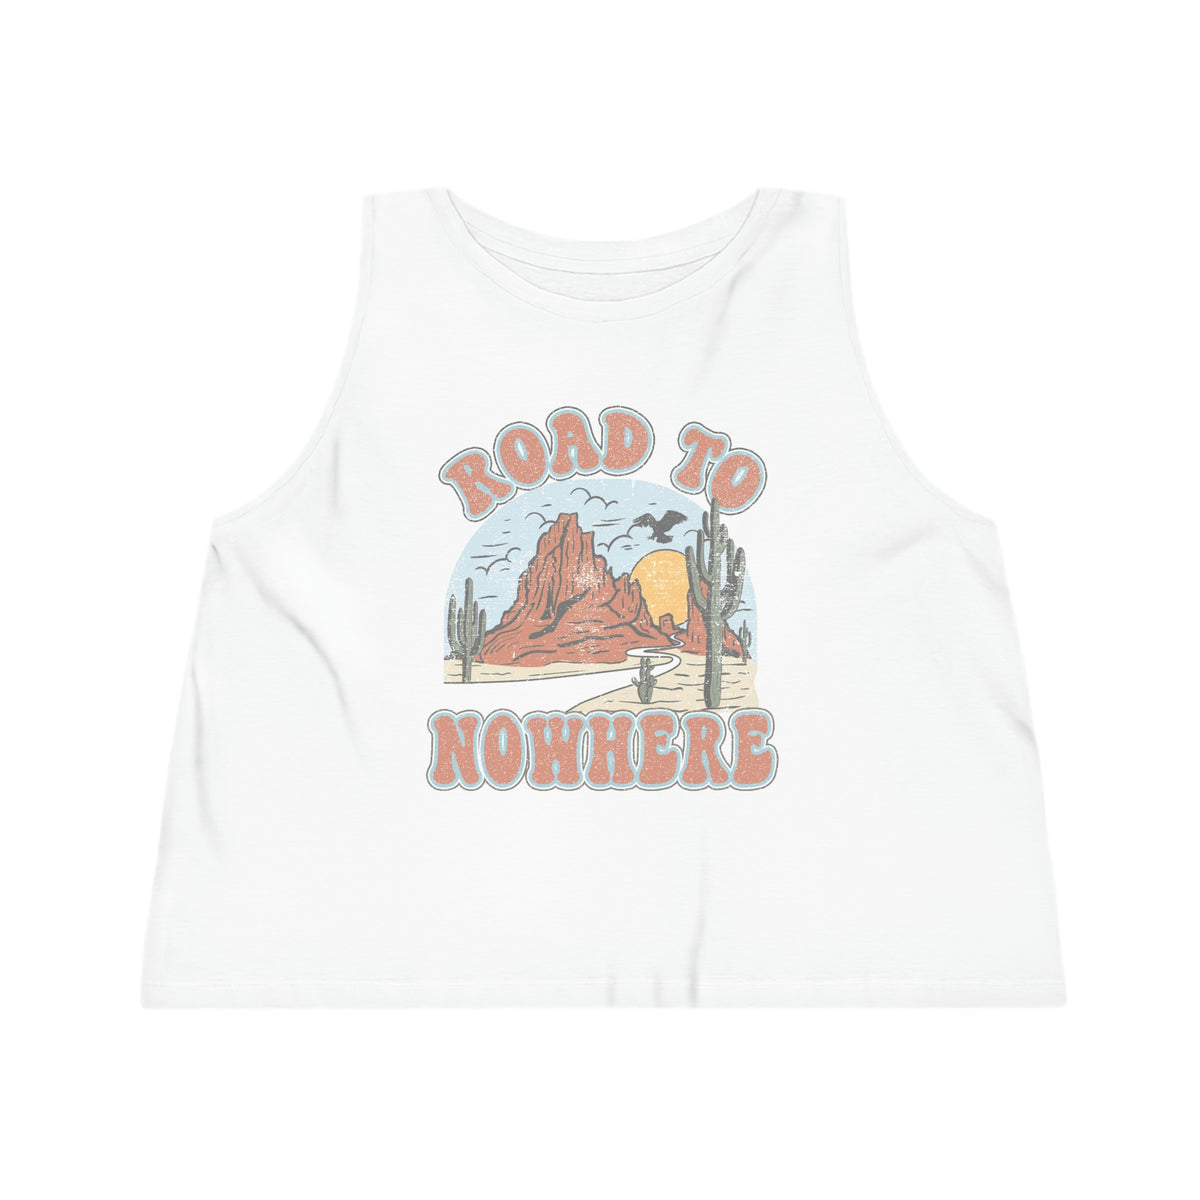 Road To Nowhere Womens Tank